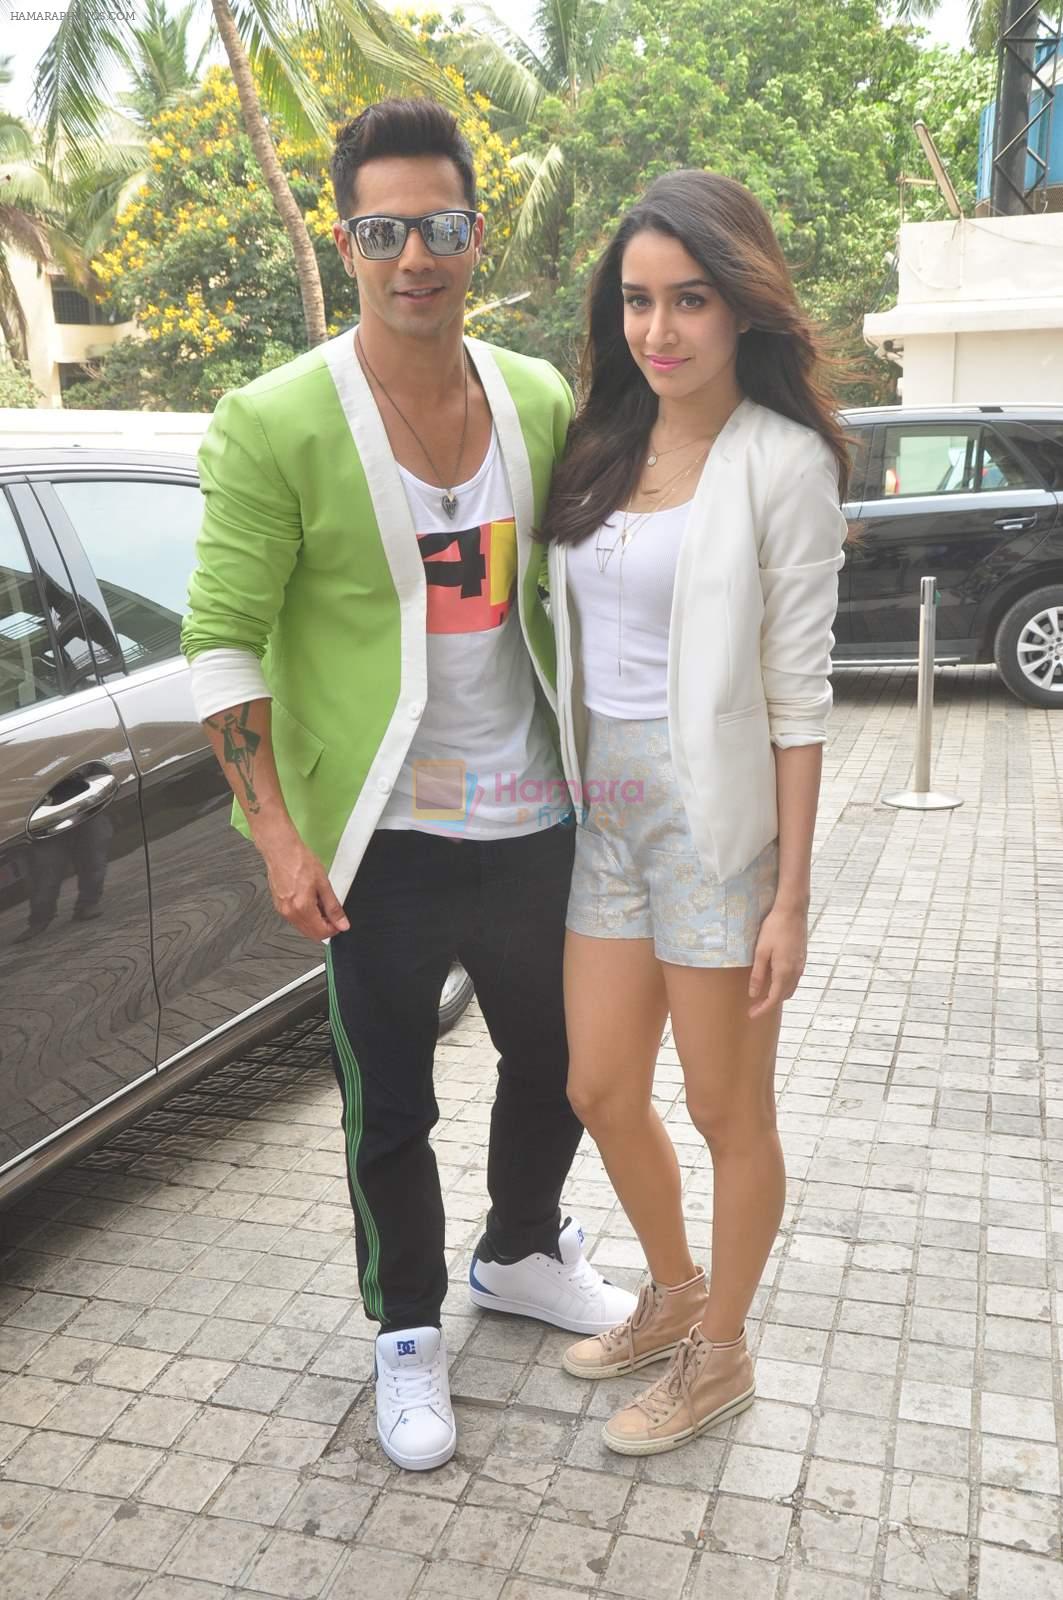 Shraddha Kapoor, Varun Dhawan at ABCD 2 3D trailor launch today afternoon at pvr juhu on 21st April 2015